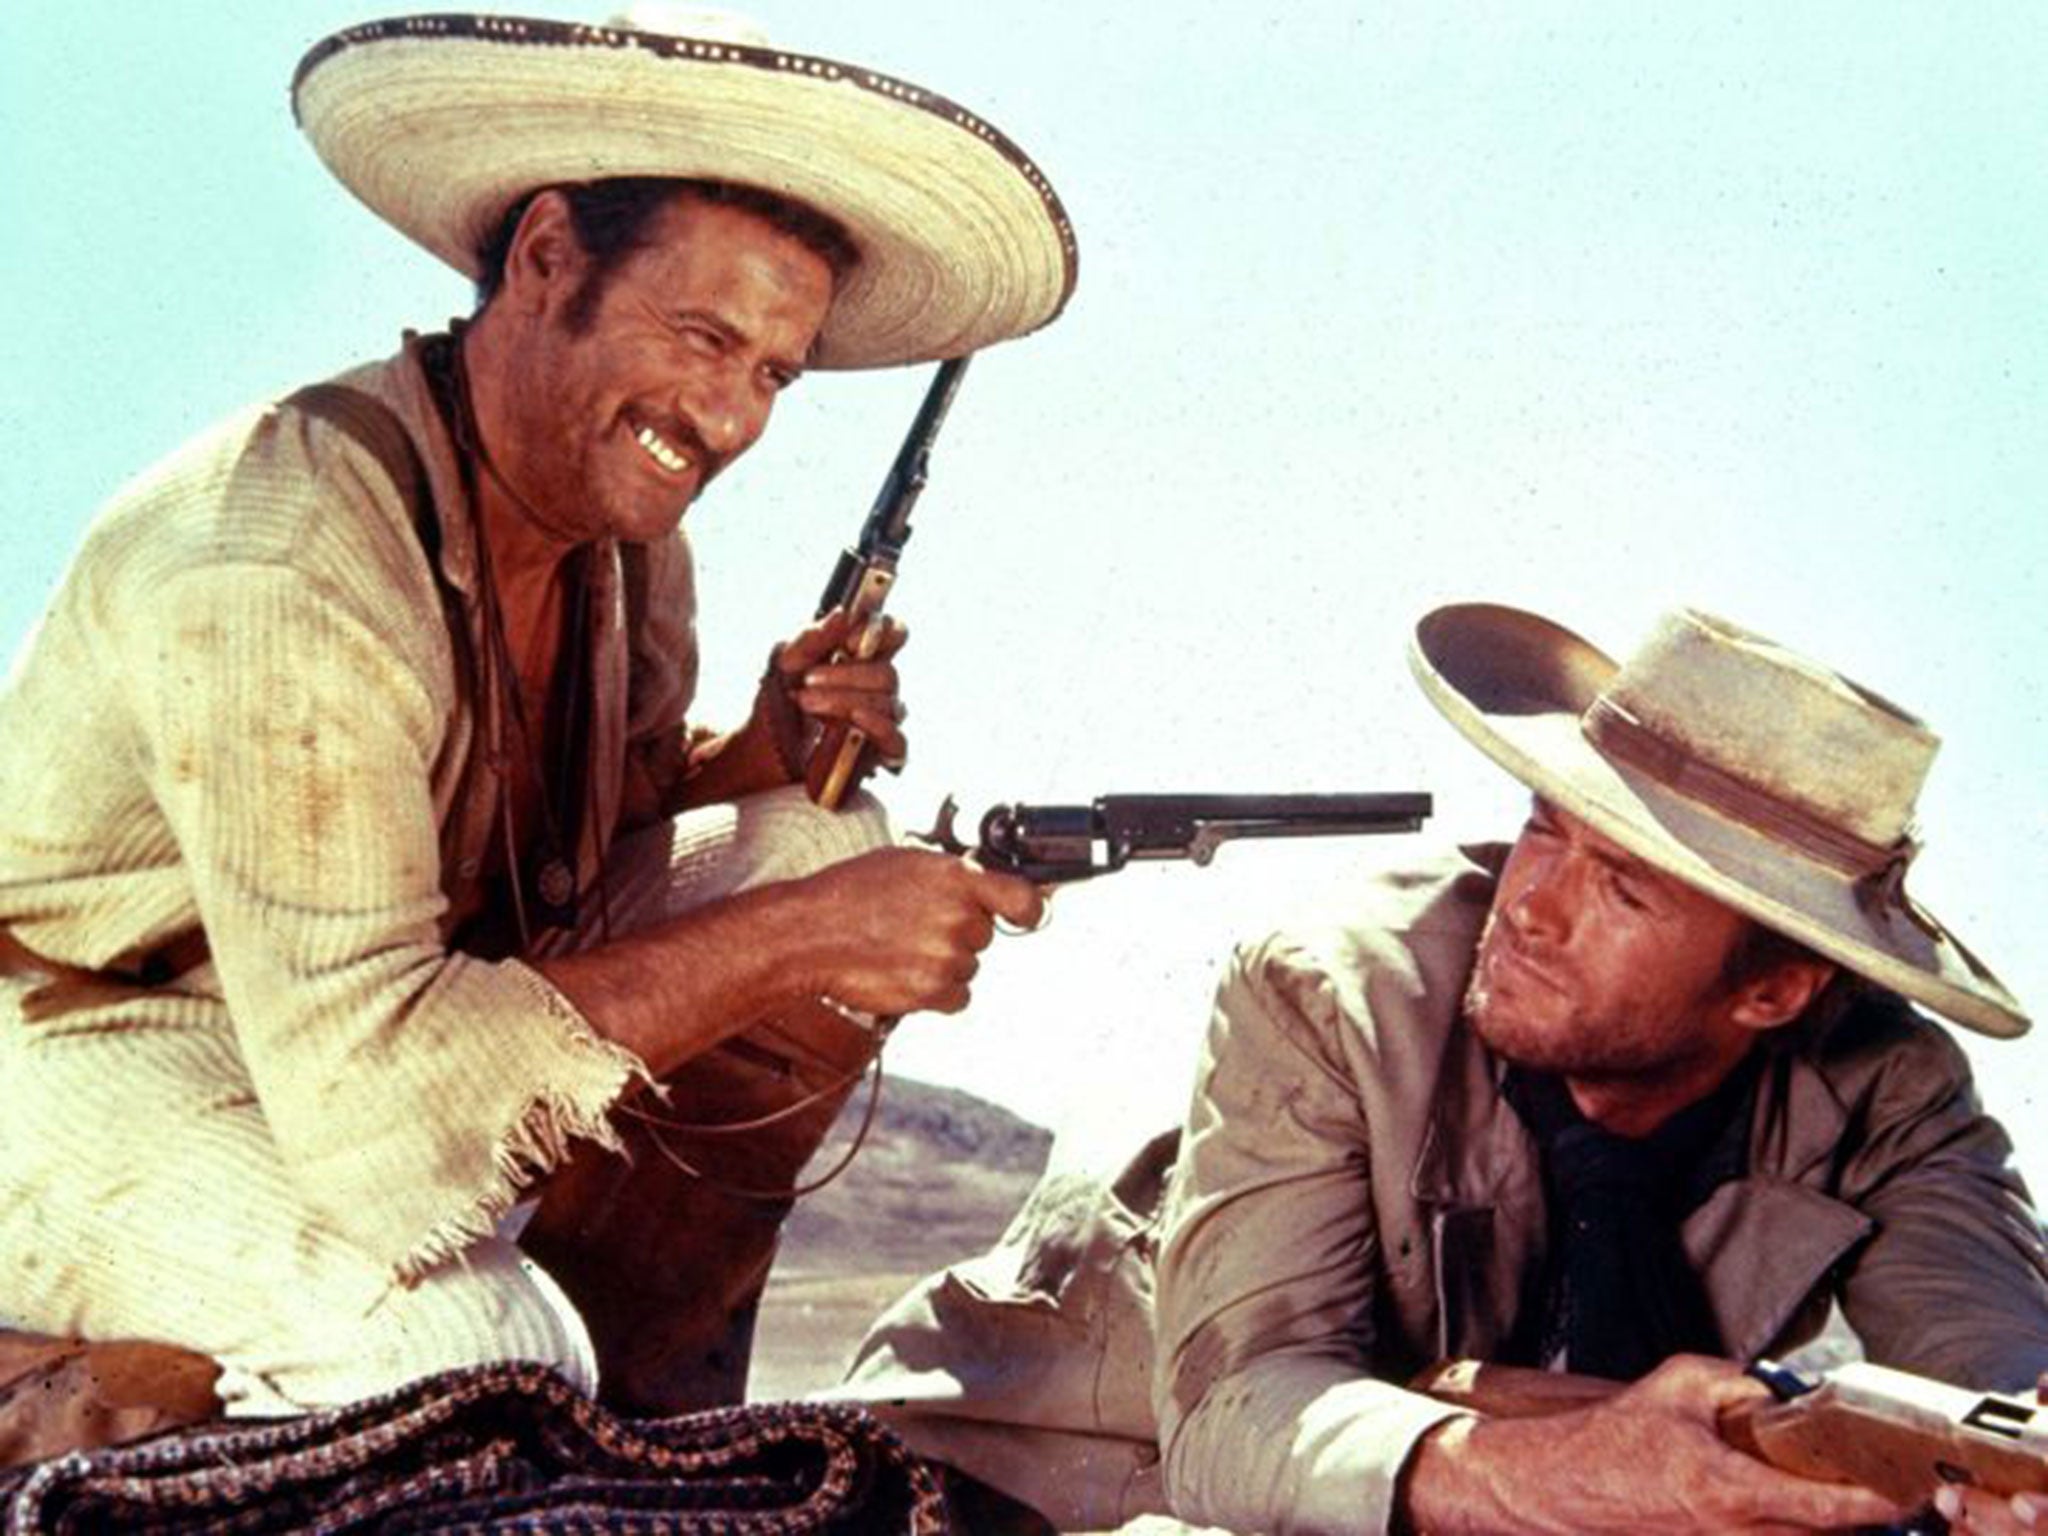 Wallach, far left, with Clint Eastwood in ‘The Good, the Bad and the Ugly’